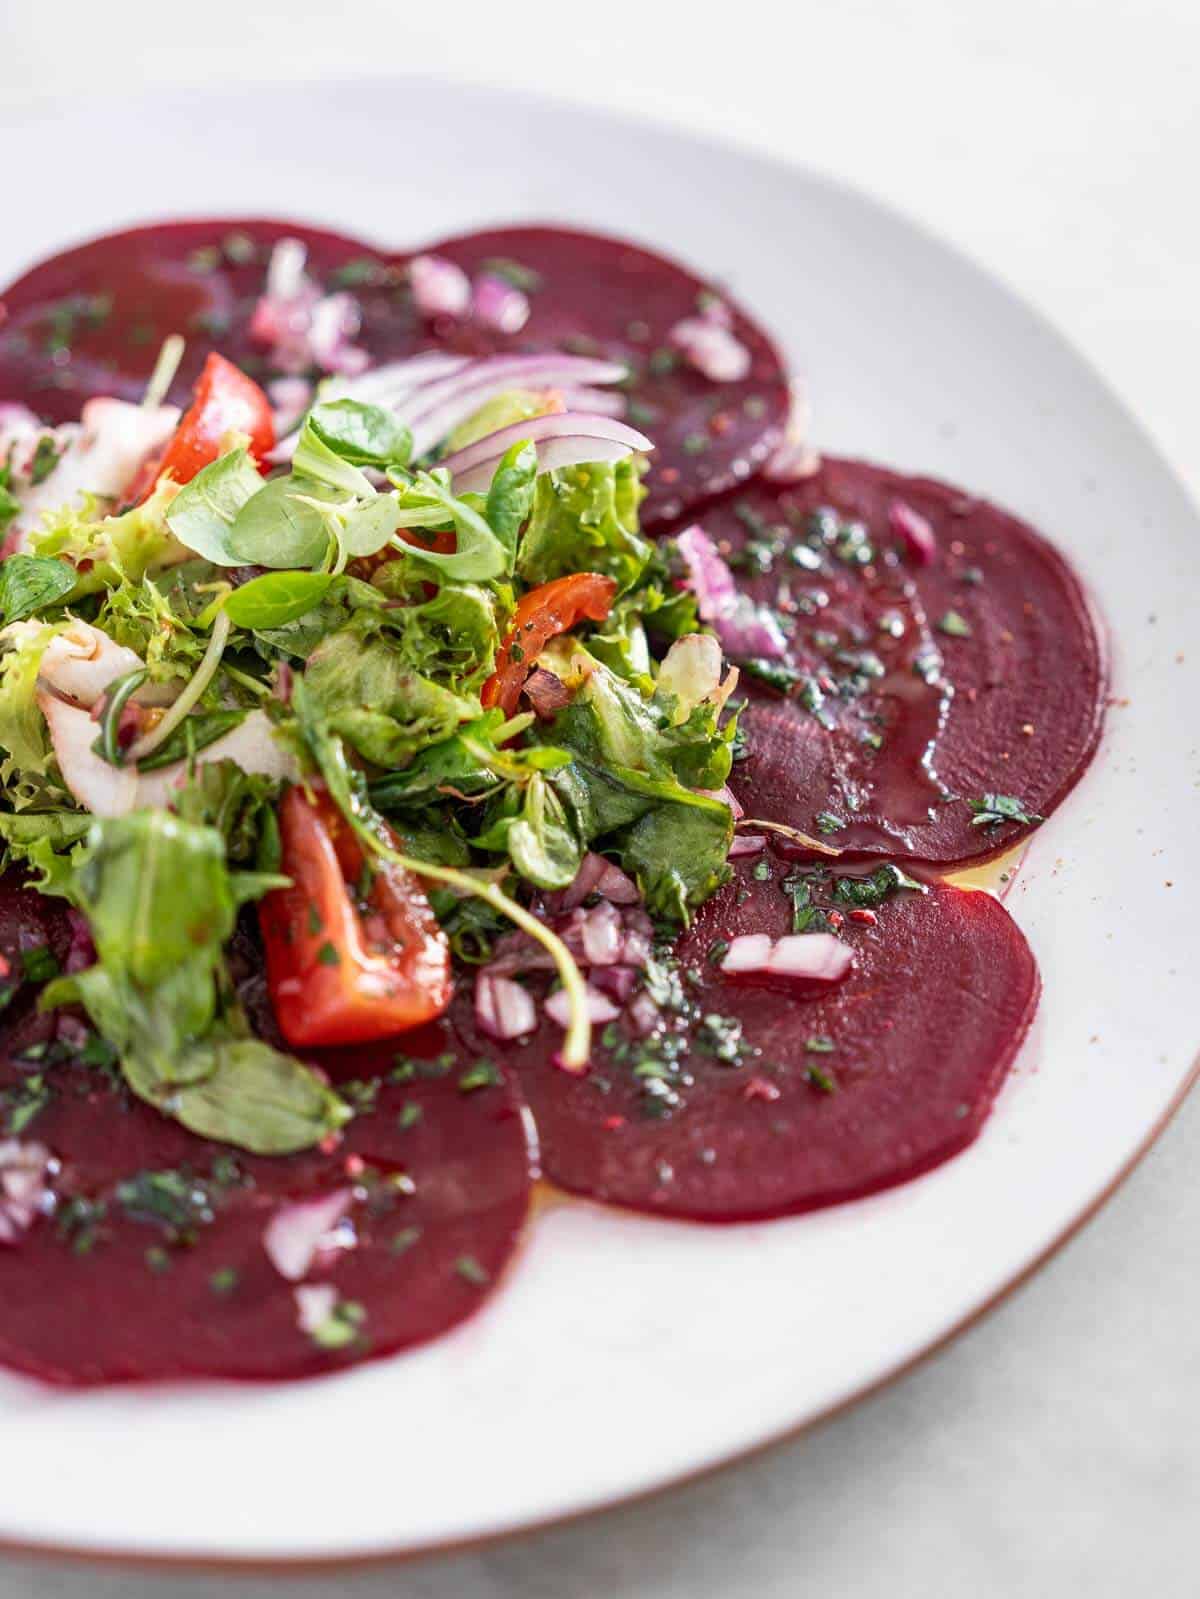 assemble the carpaccio of beets salad by laying the greens and tomatoes on top of the beets discs. 